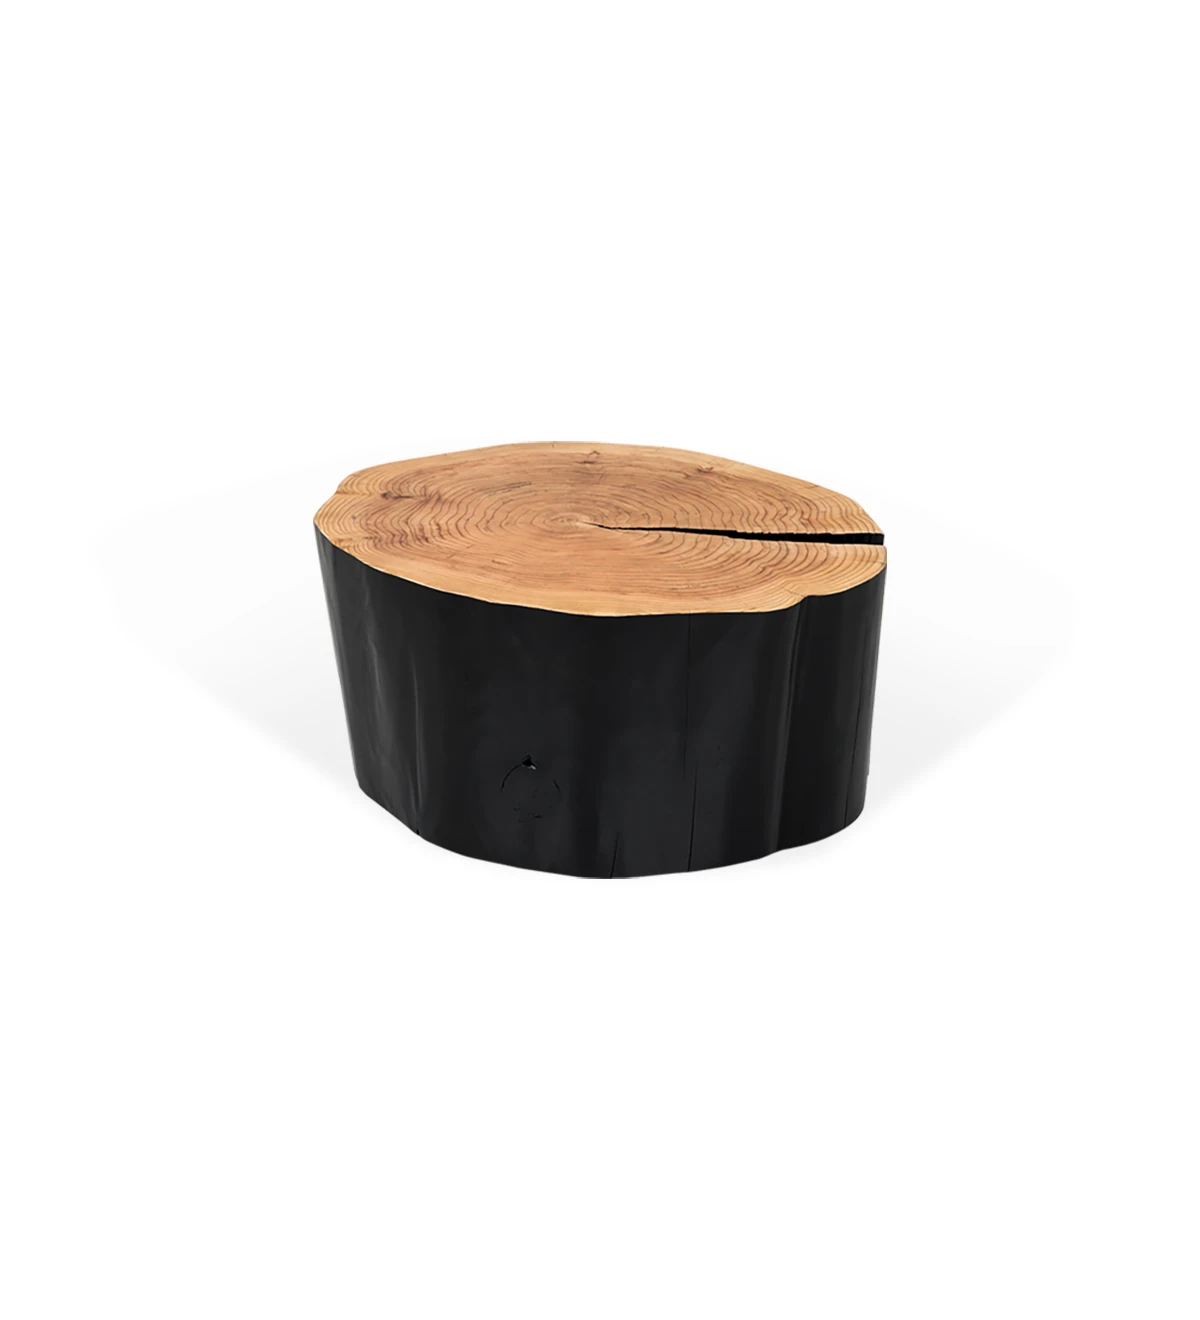 Medium trunk center table in natural cryptomeria wood lacquered in black, Ø 60 to 75 cm.